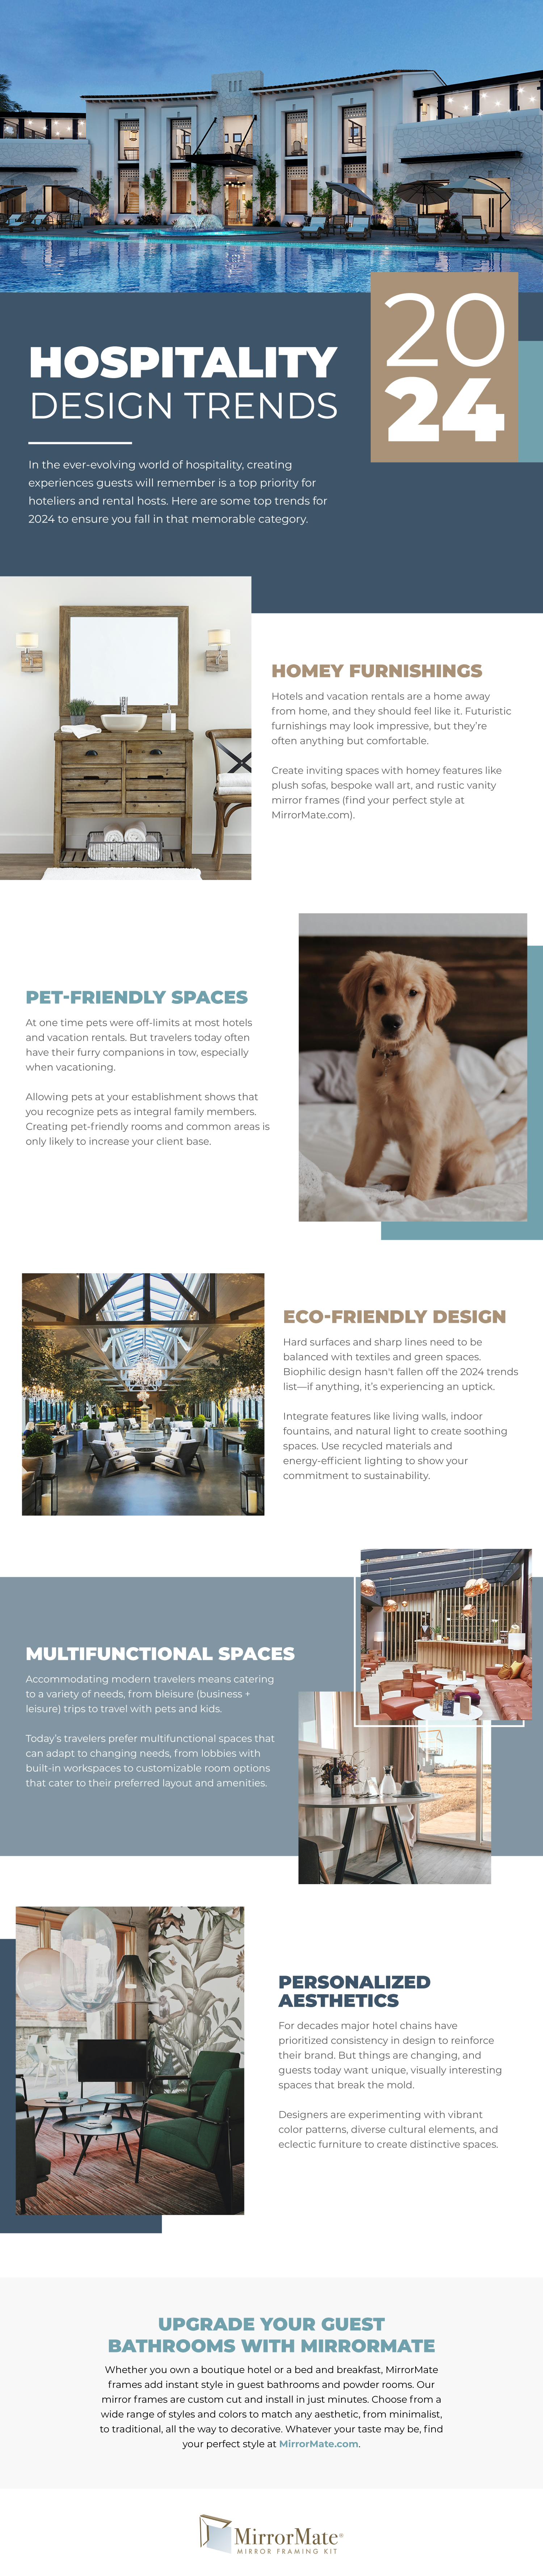 Hospitality Design Trends Infographic